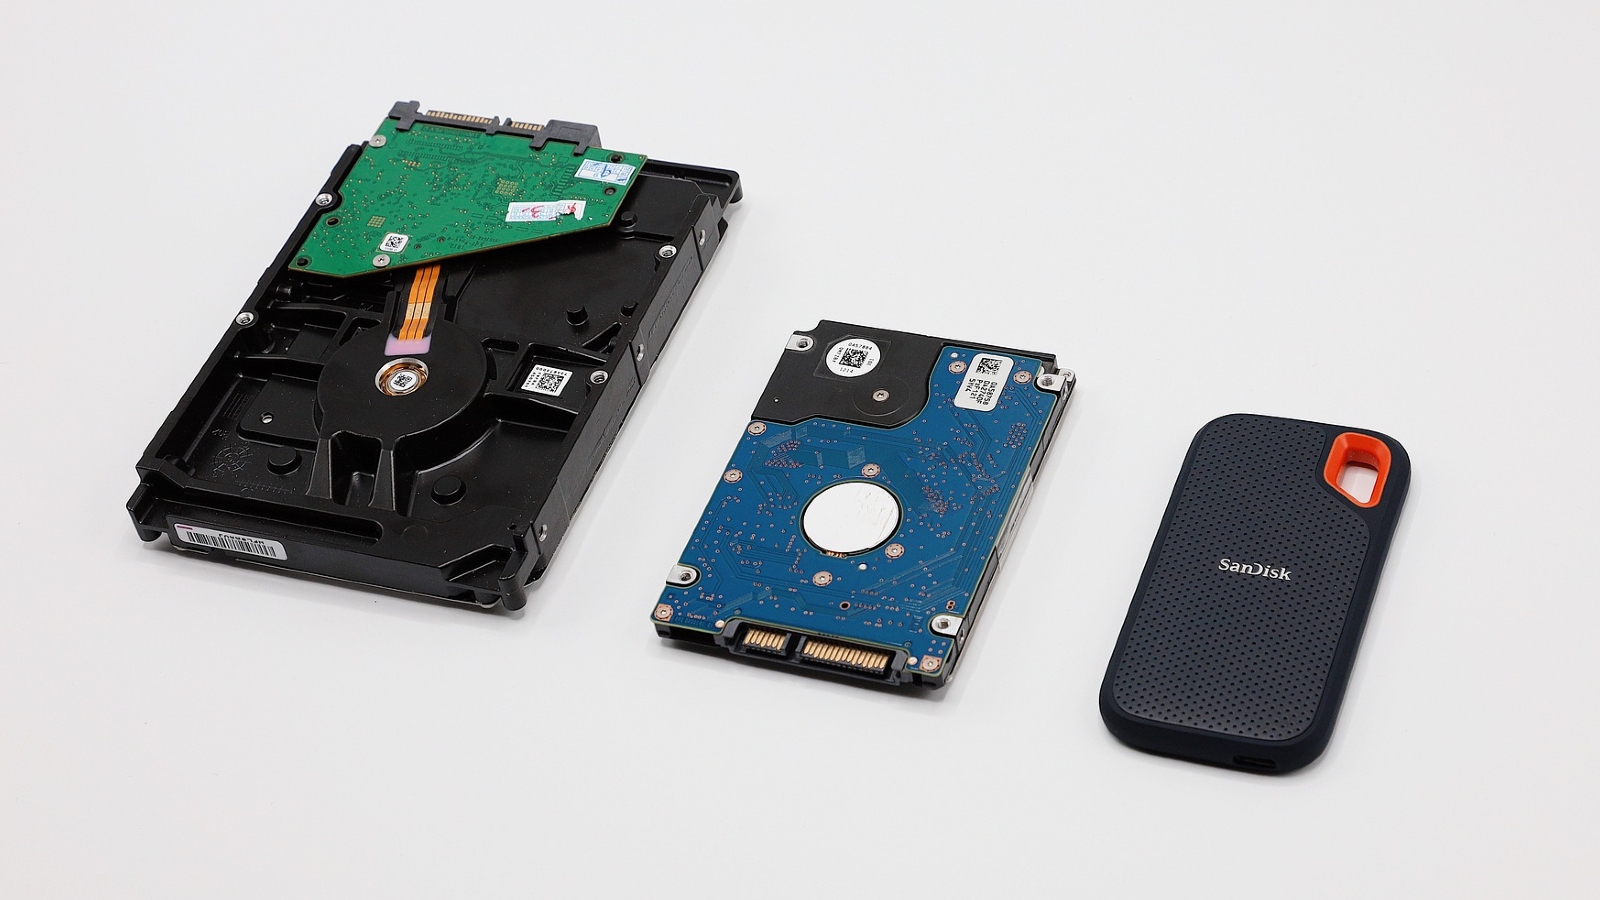 android, running out of storage space? check out these external storage devices